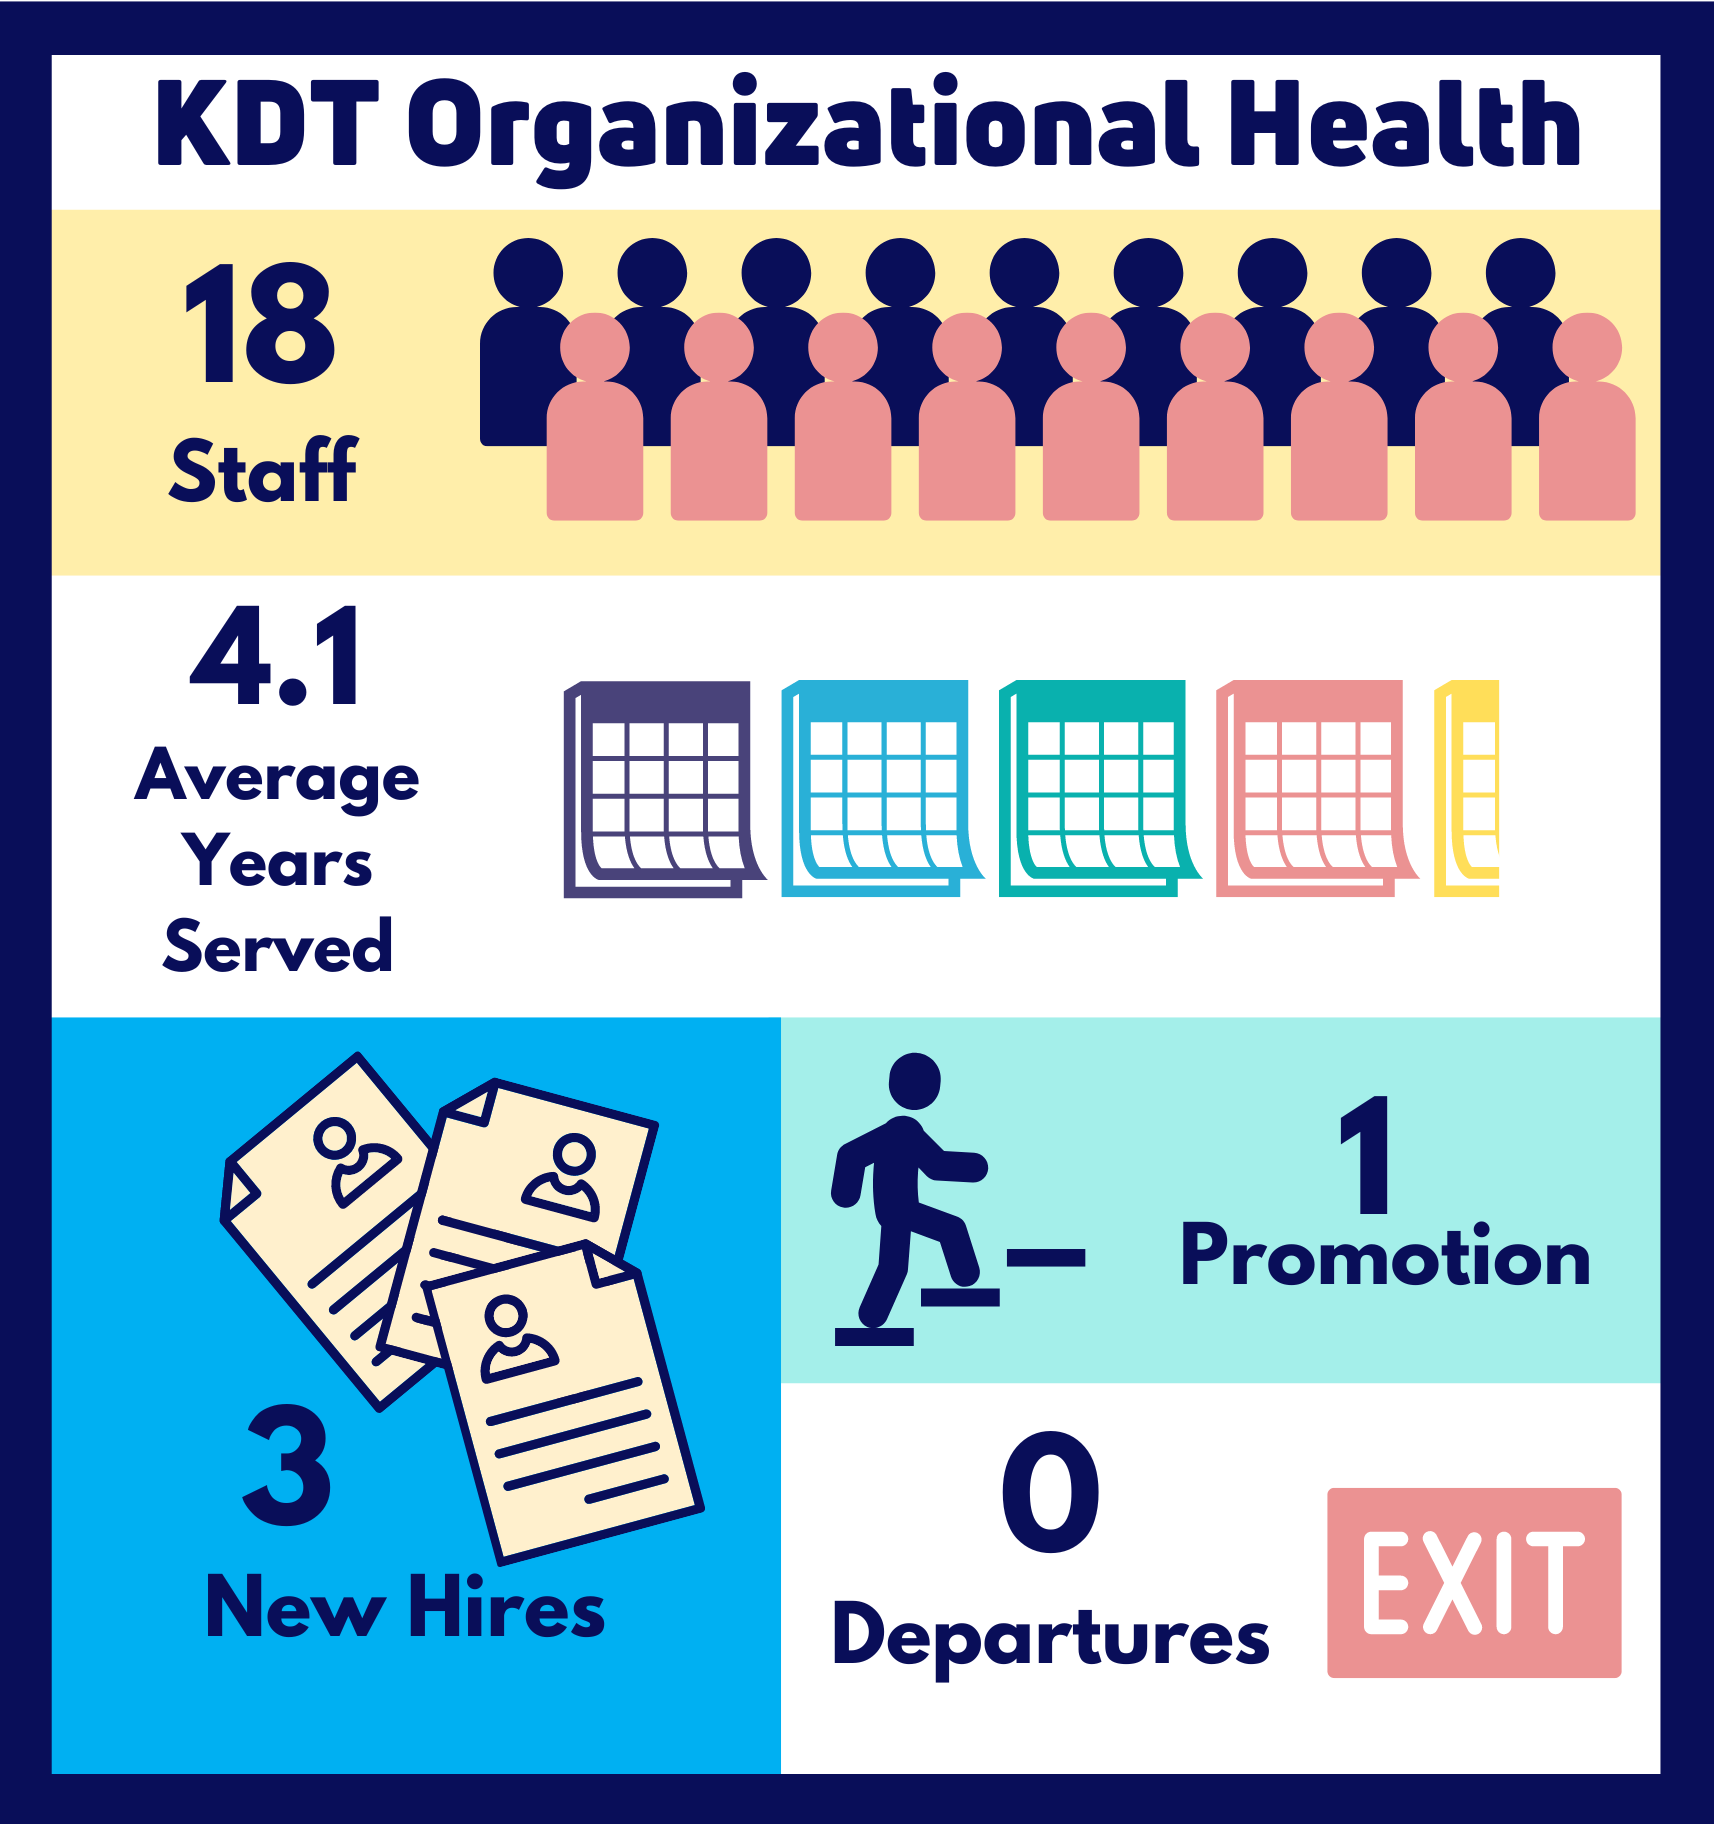 KDT Organizational Health 2023 Infographic; During FY2023, KDT had 19 staff members with 4.1 average years served; had 3 new hires, 1 promotion, and 0 departures.